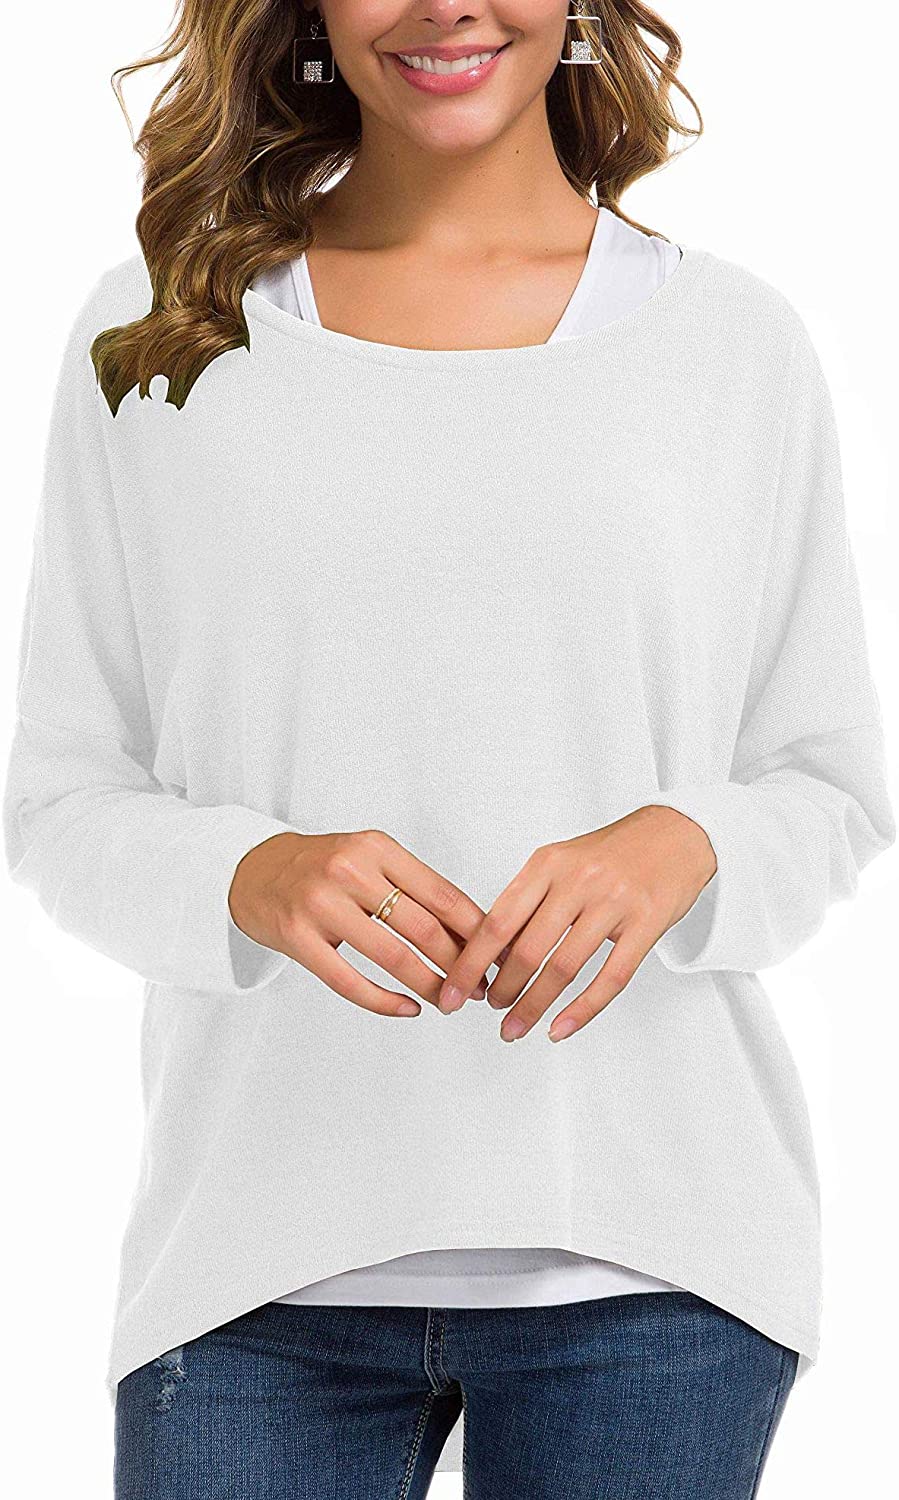 UGET Women's Sweater Casual Oversized Baggy Loose Fitting Shirts Batwing  Sleeve | eBay